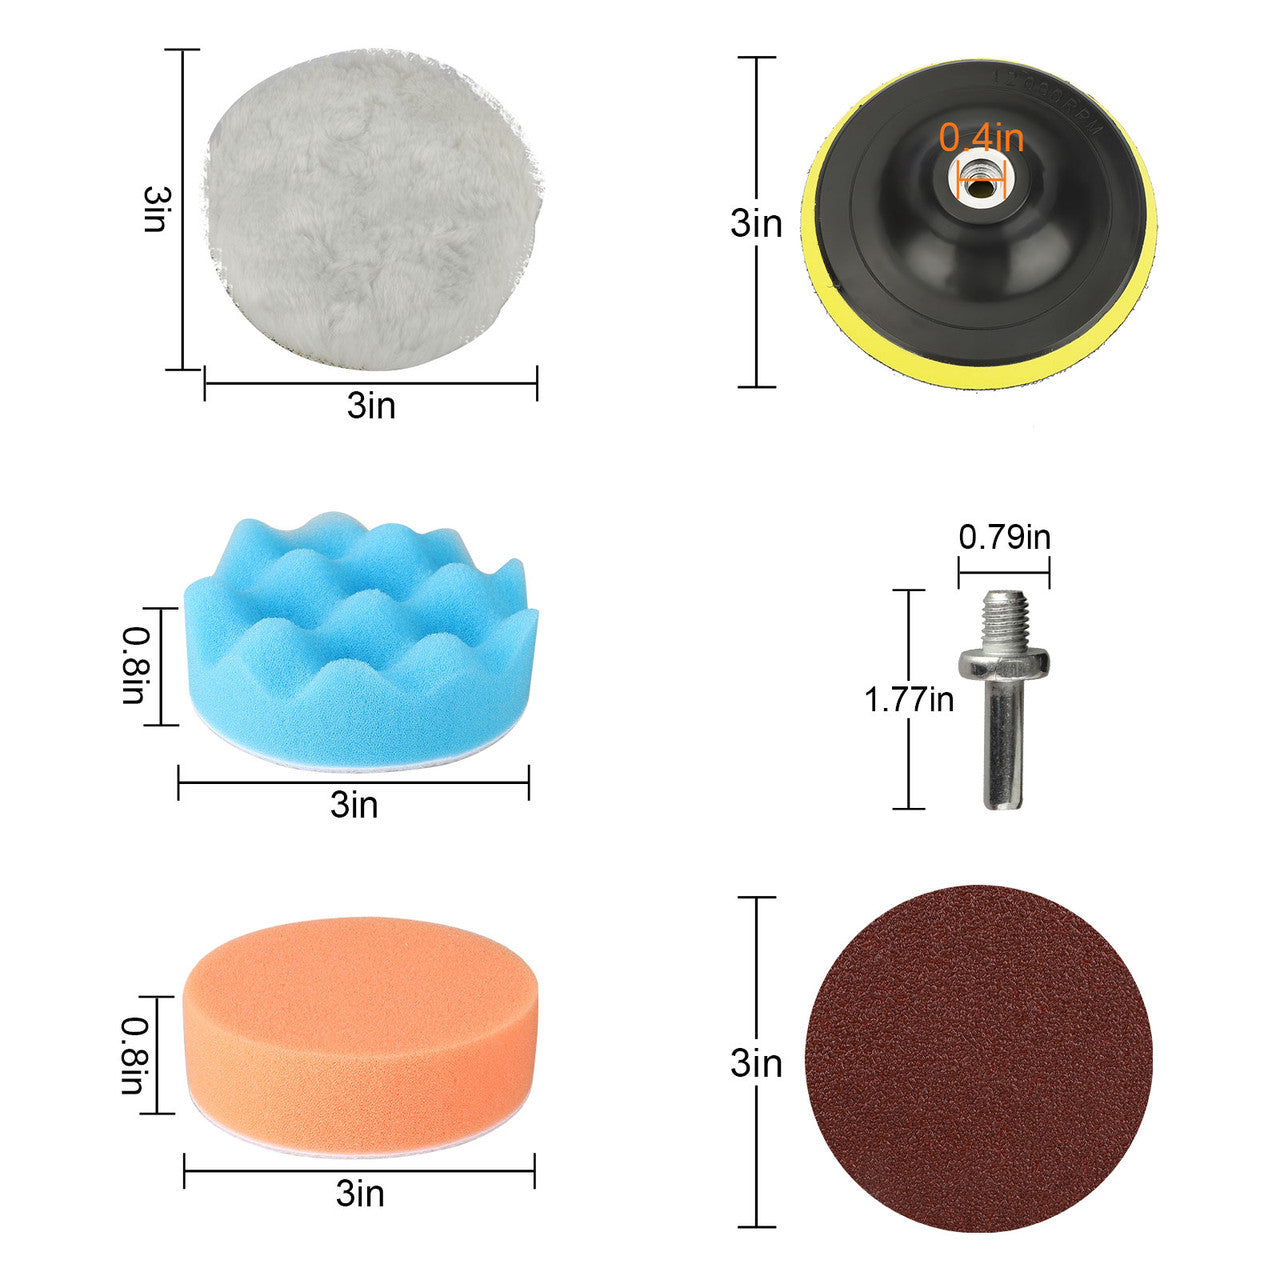 31Pcs 3 Inch Car Polishing & Buffing Sponge Pads Kit, Wool Bonnet Sponge Pad for Household Electric Drill and Auto Polisher with M14 Drill Adapter for Washing Cleaning Waxing Dusting Sealing Glaze